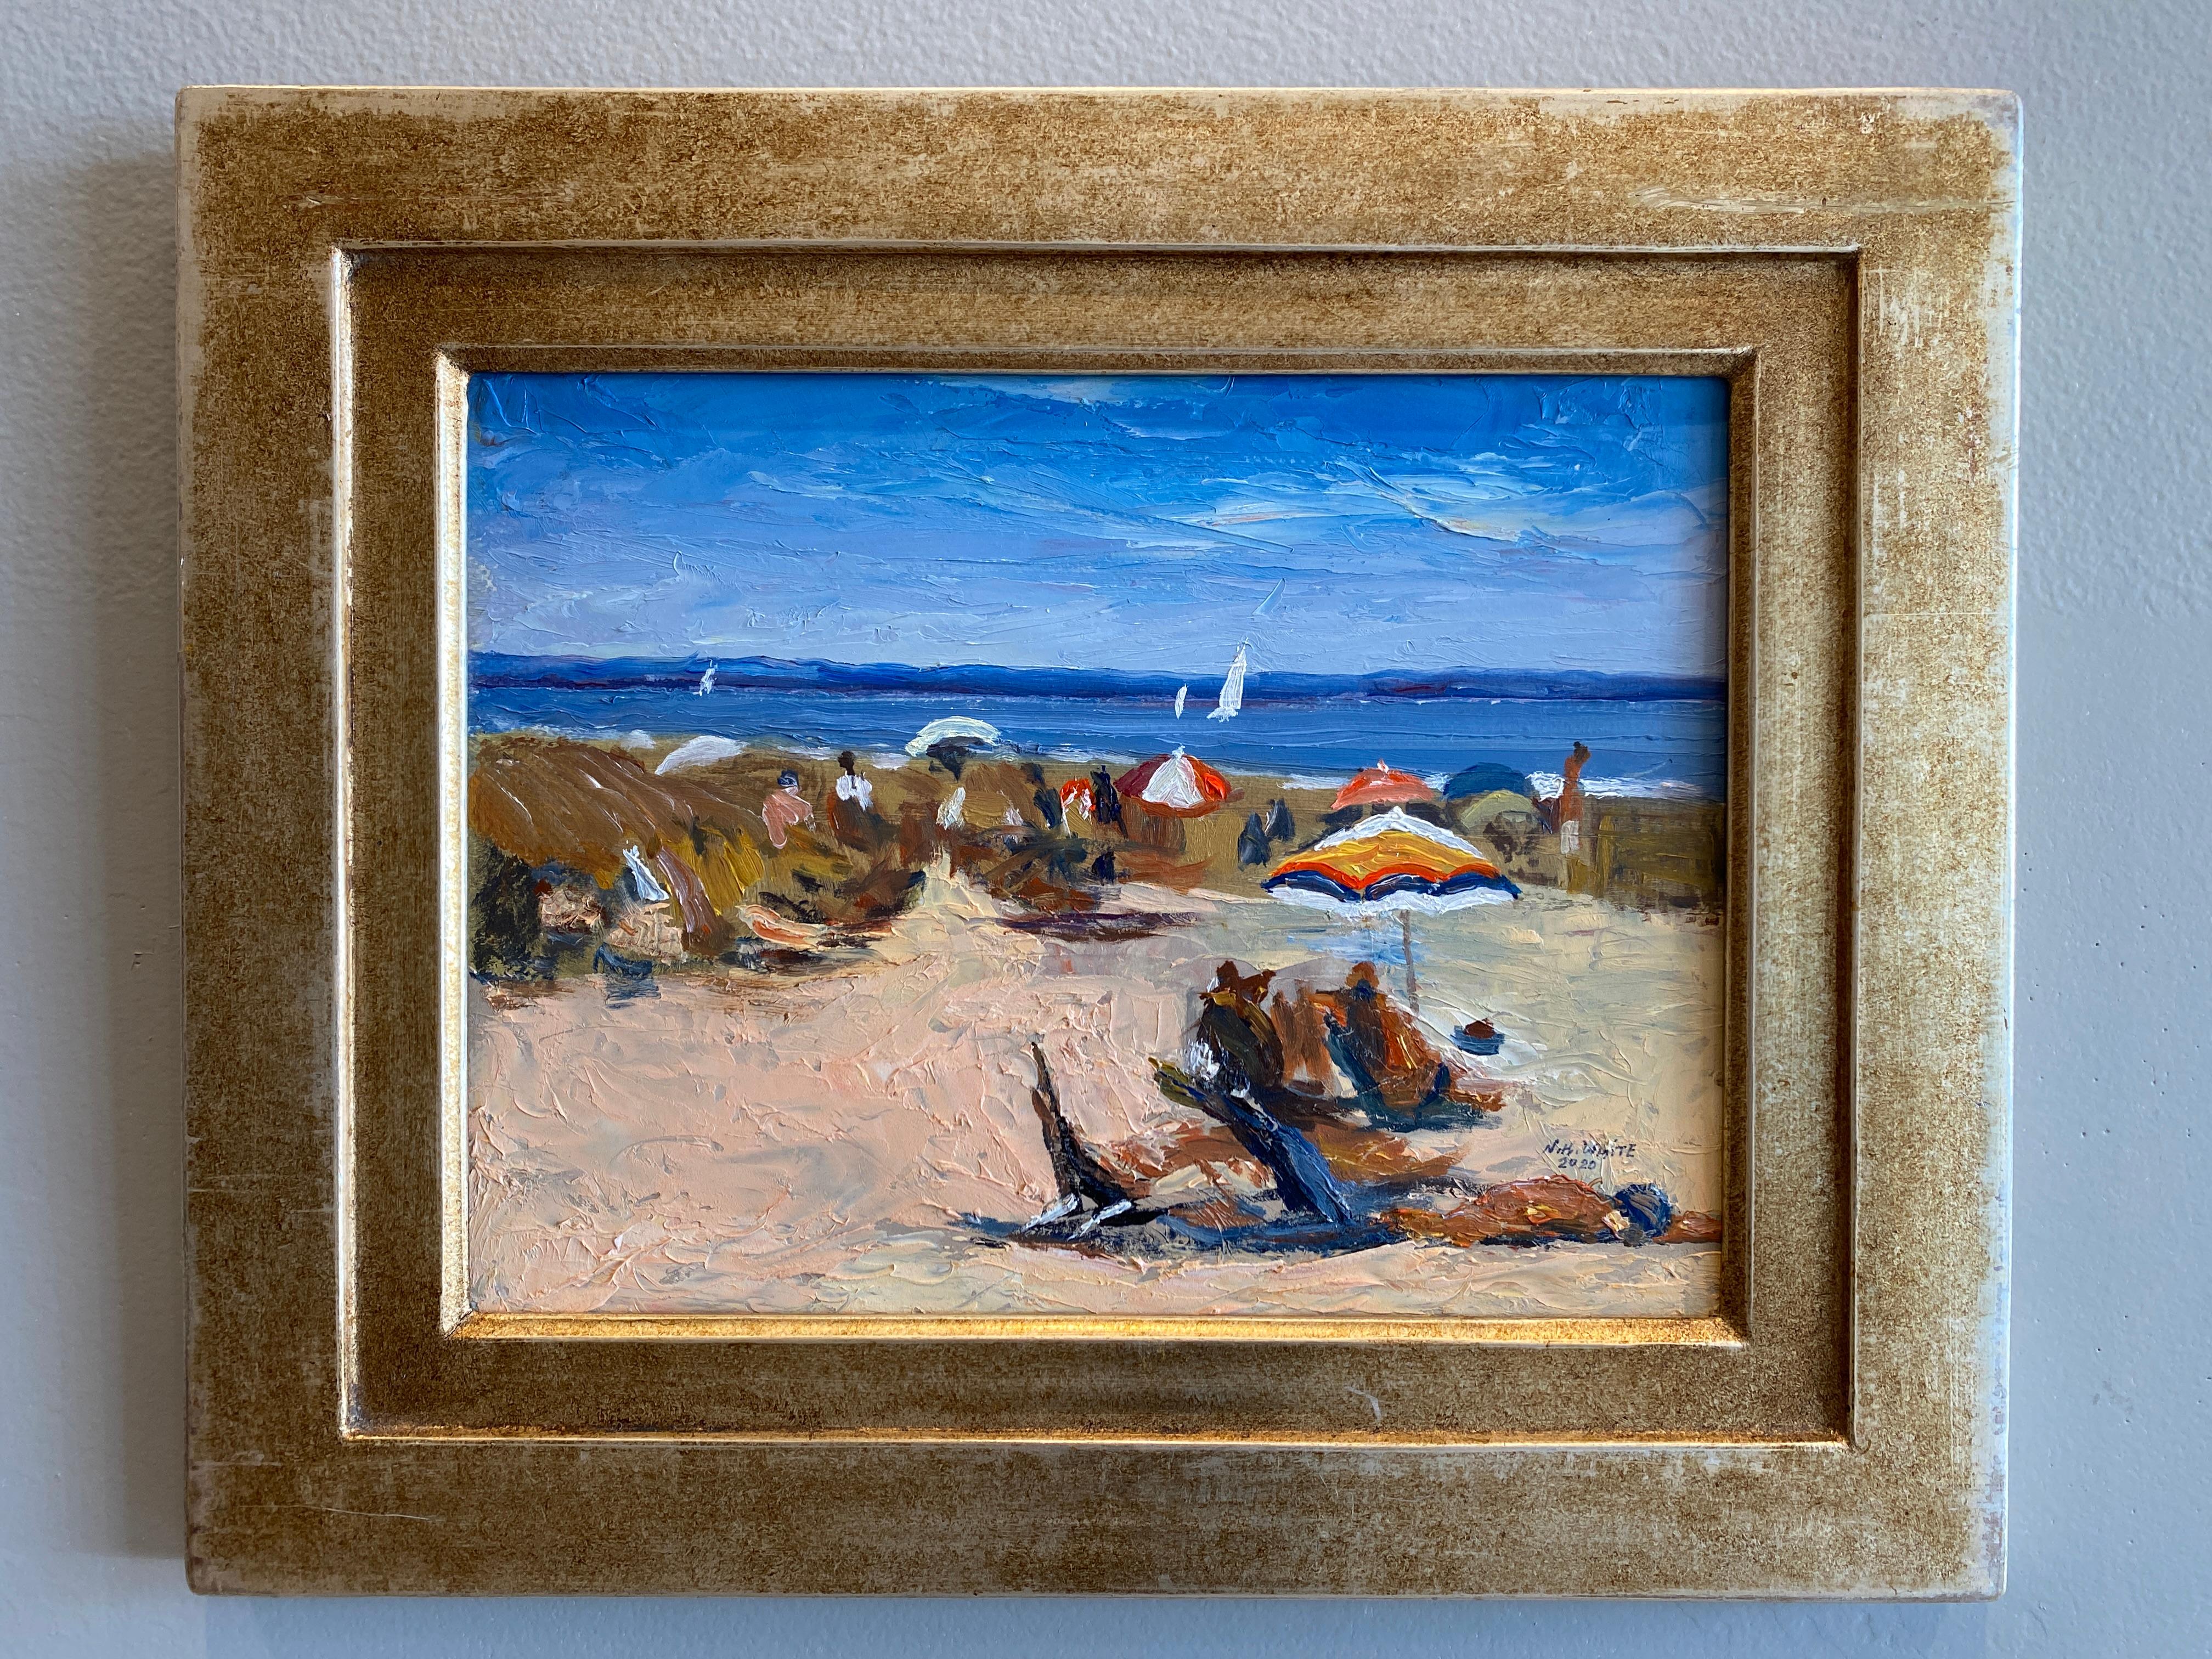 Ogunquit Maine, 03.13.2020 - Painting by Nelson White